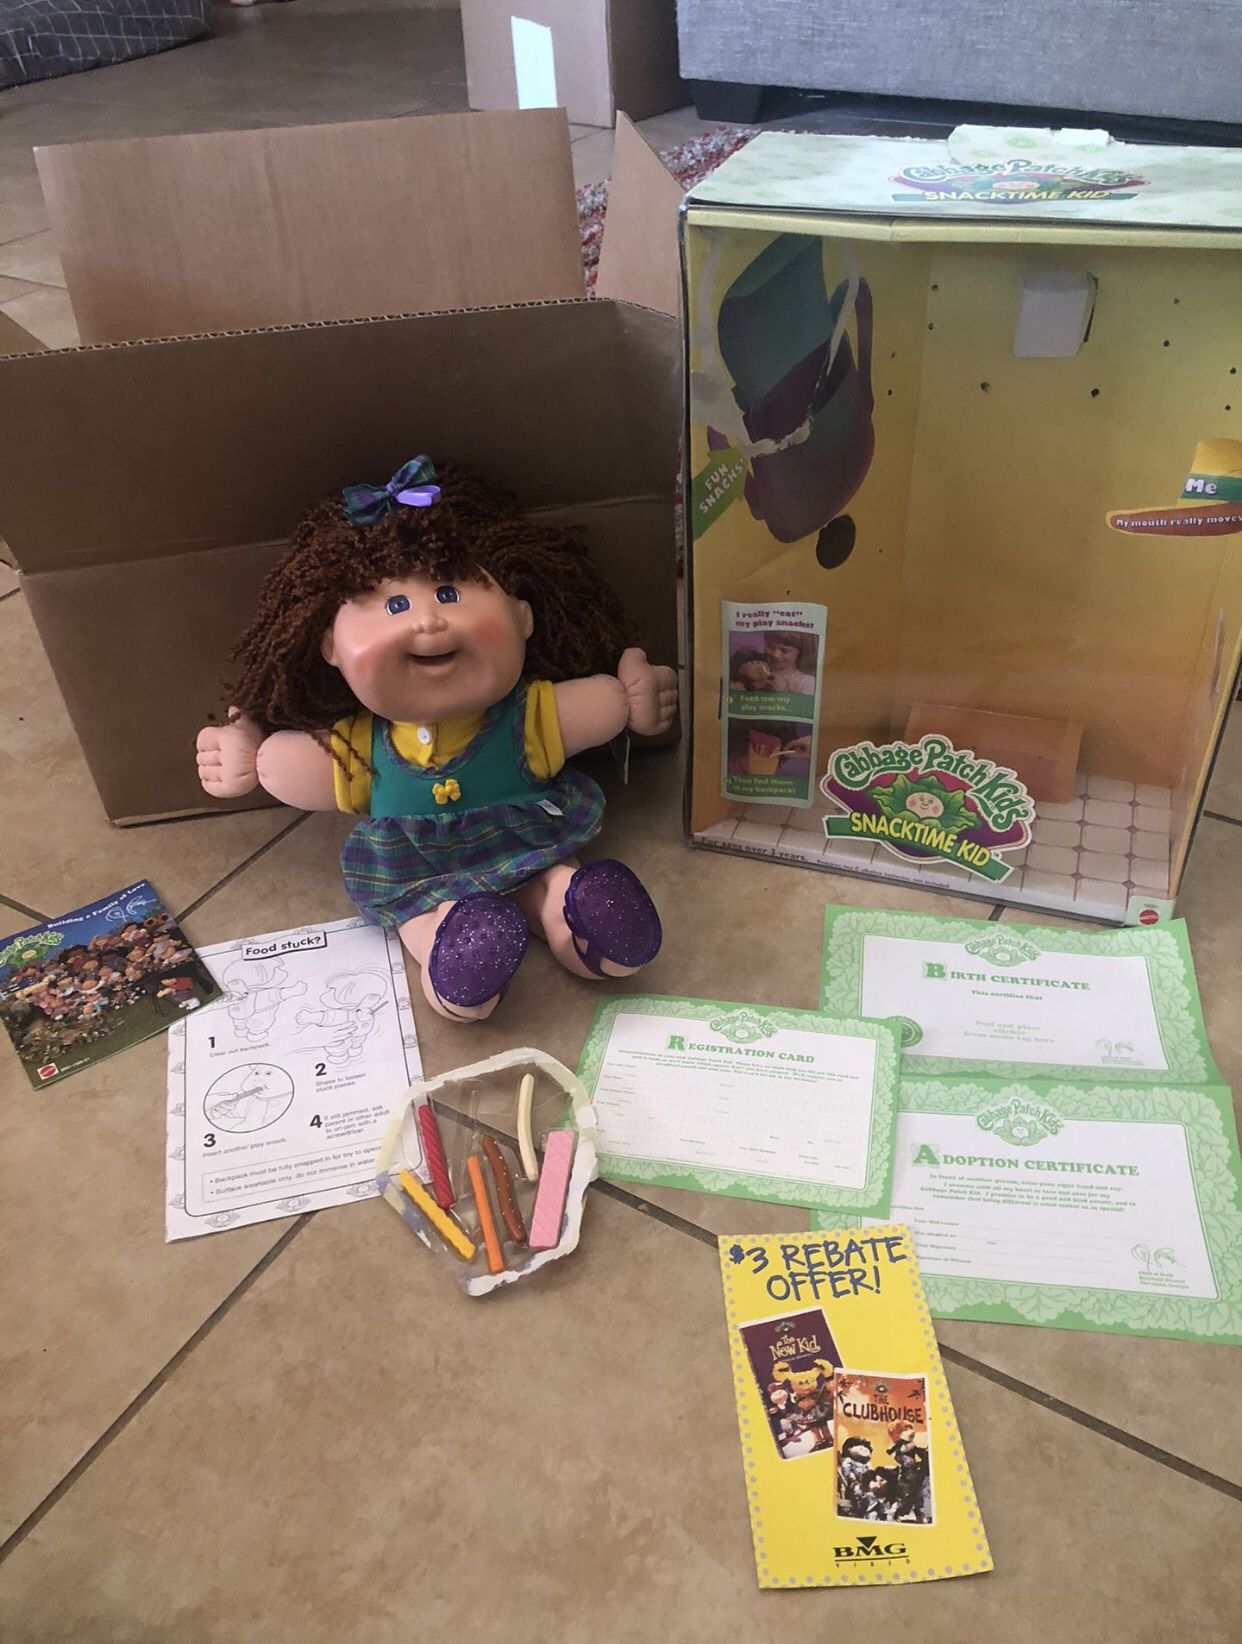 NEW RARE SNACK TIME CABBAGE PATCH DOLL WORKING